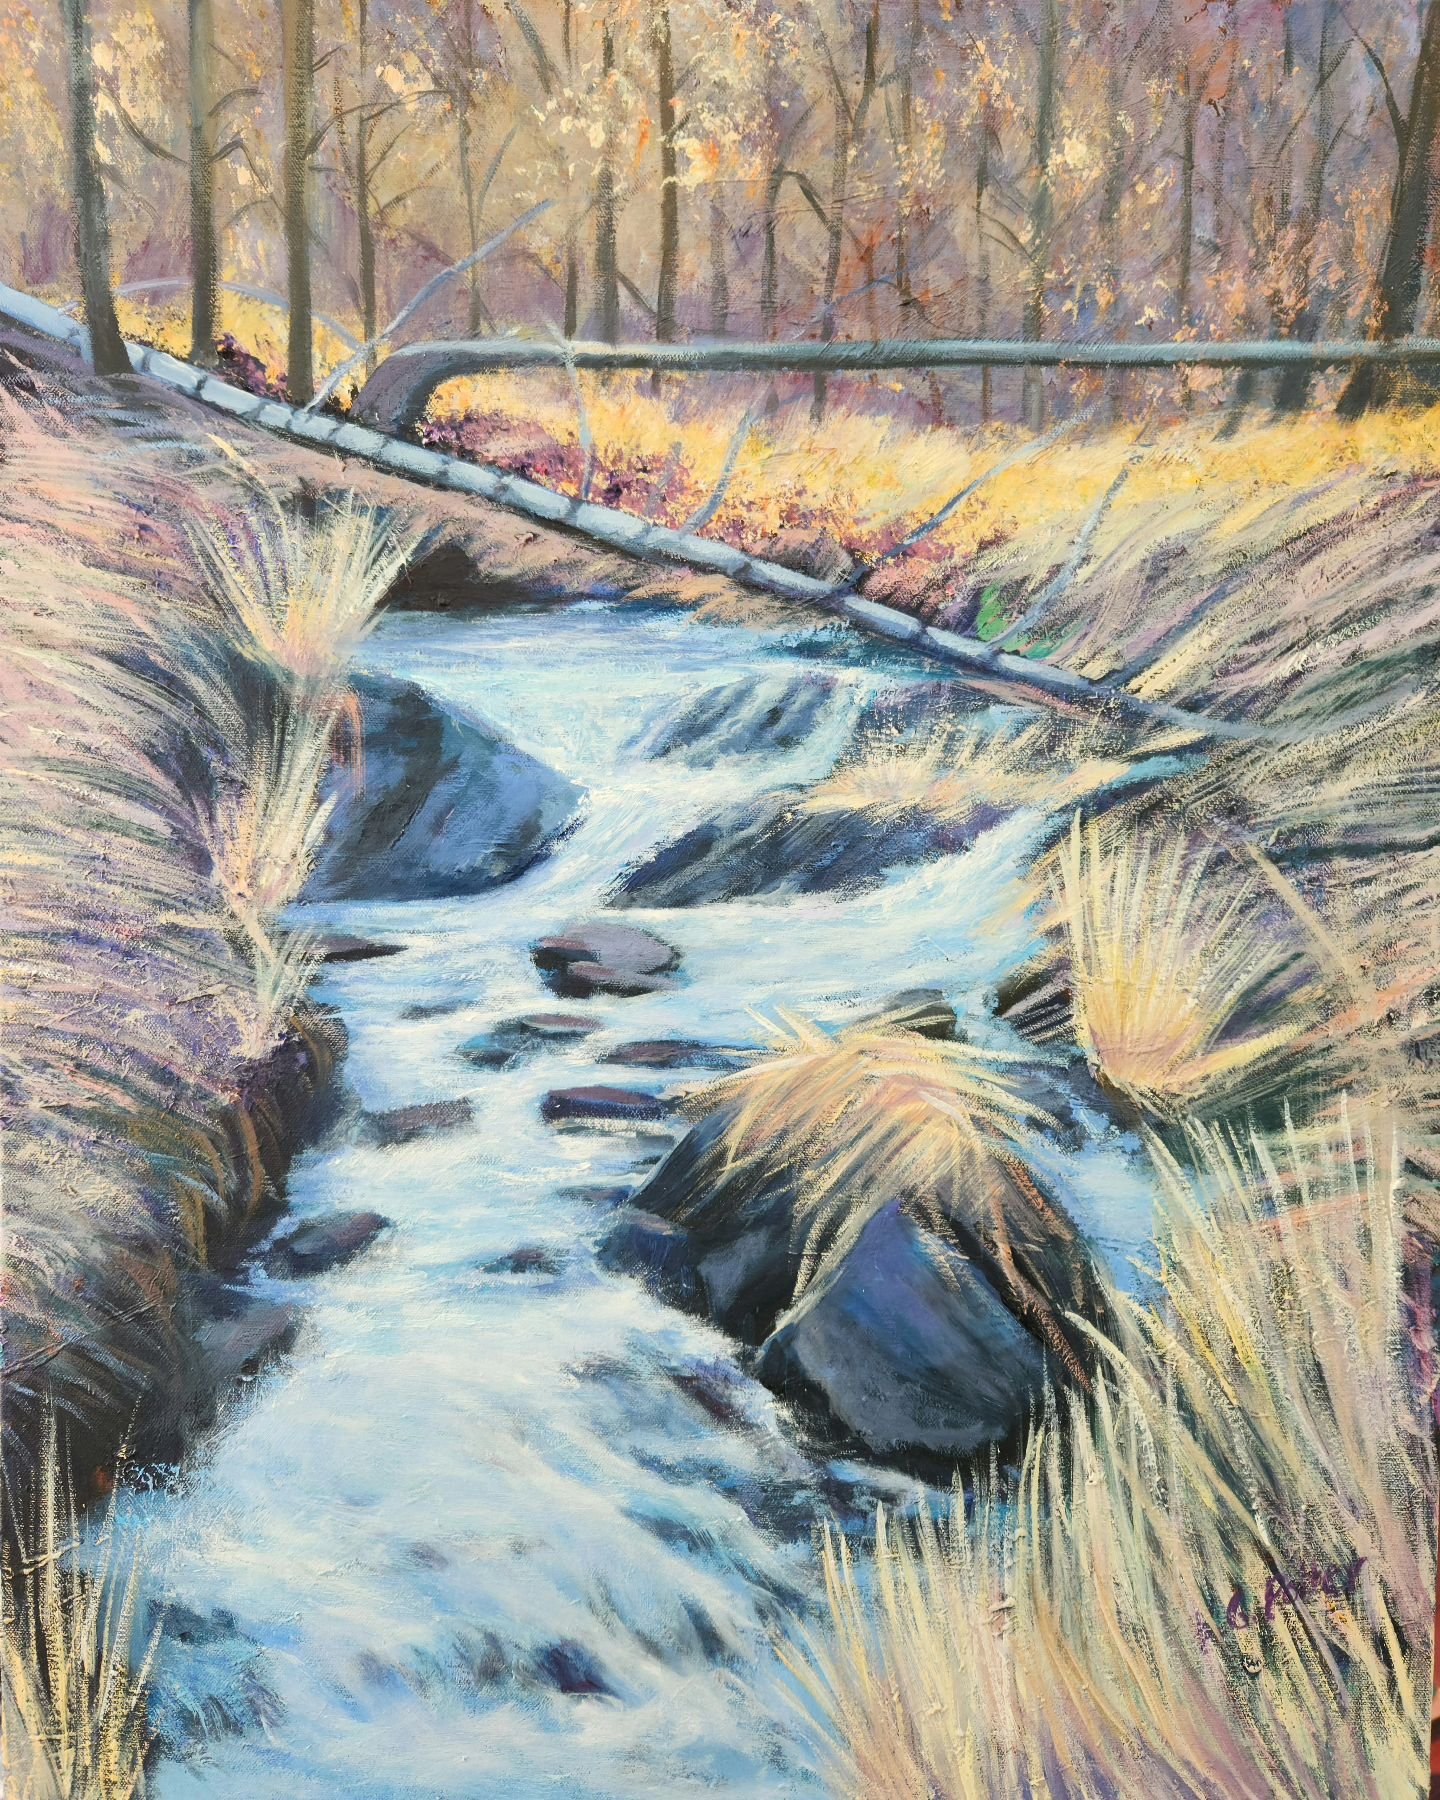 &quot;Fall Creek&quot;
30x24 oil on canvas

Will be in my show @oswaldrestaurant next week! We are hanging the show this coming Wednesday morning. My dear husband is finishing the framing while recovering from hernia surgery. 
Reception Saturday May 